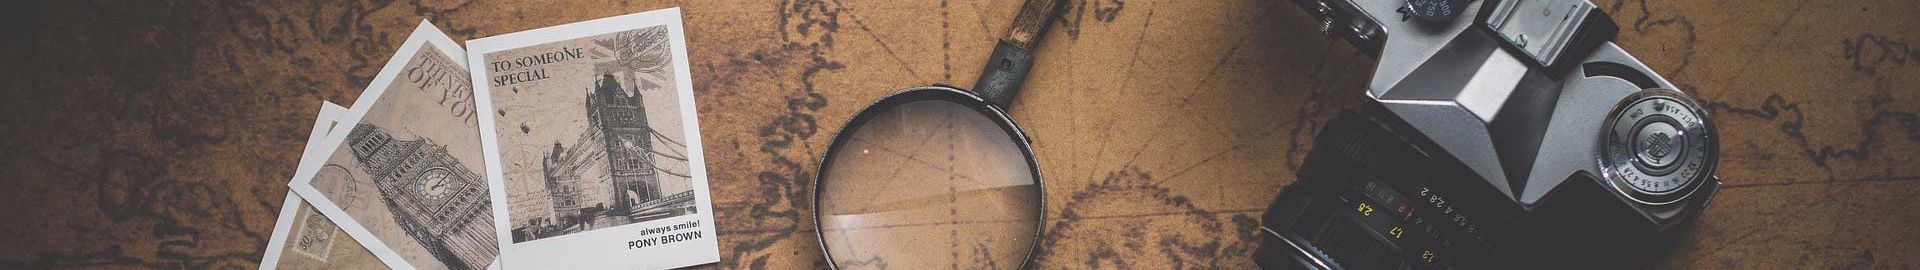 Genealogy stock header image showing postcards, a map, and magnifying glass